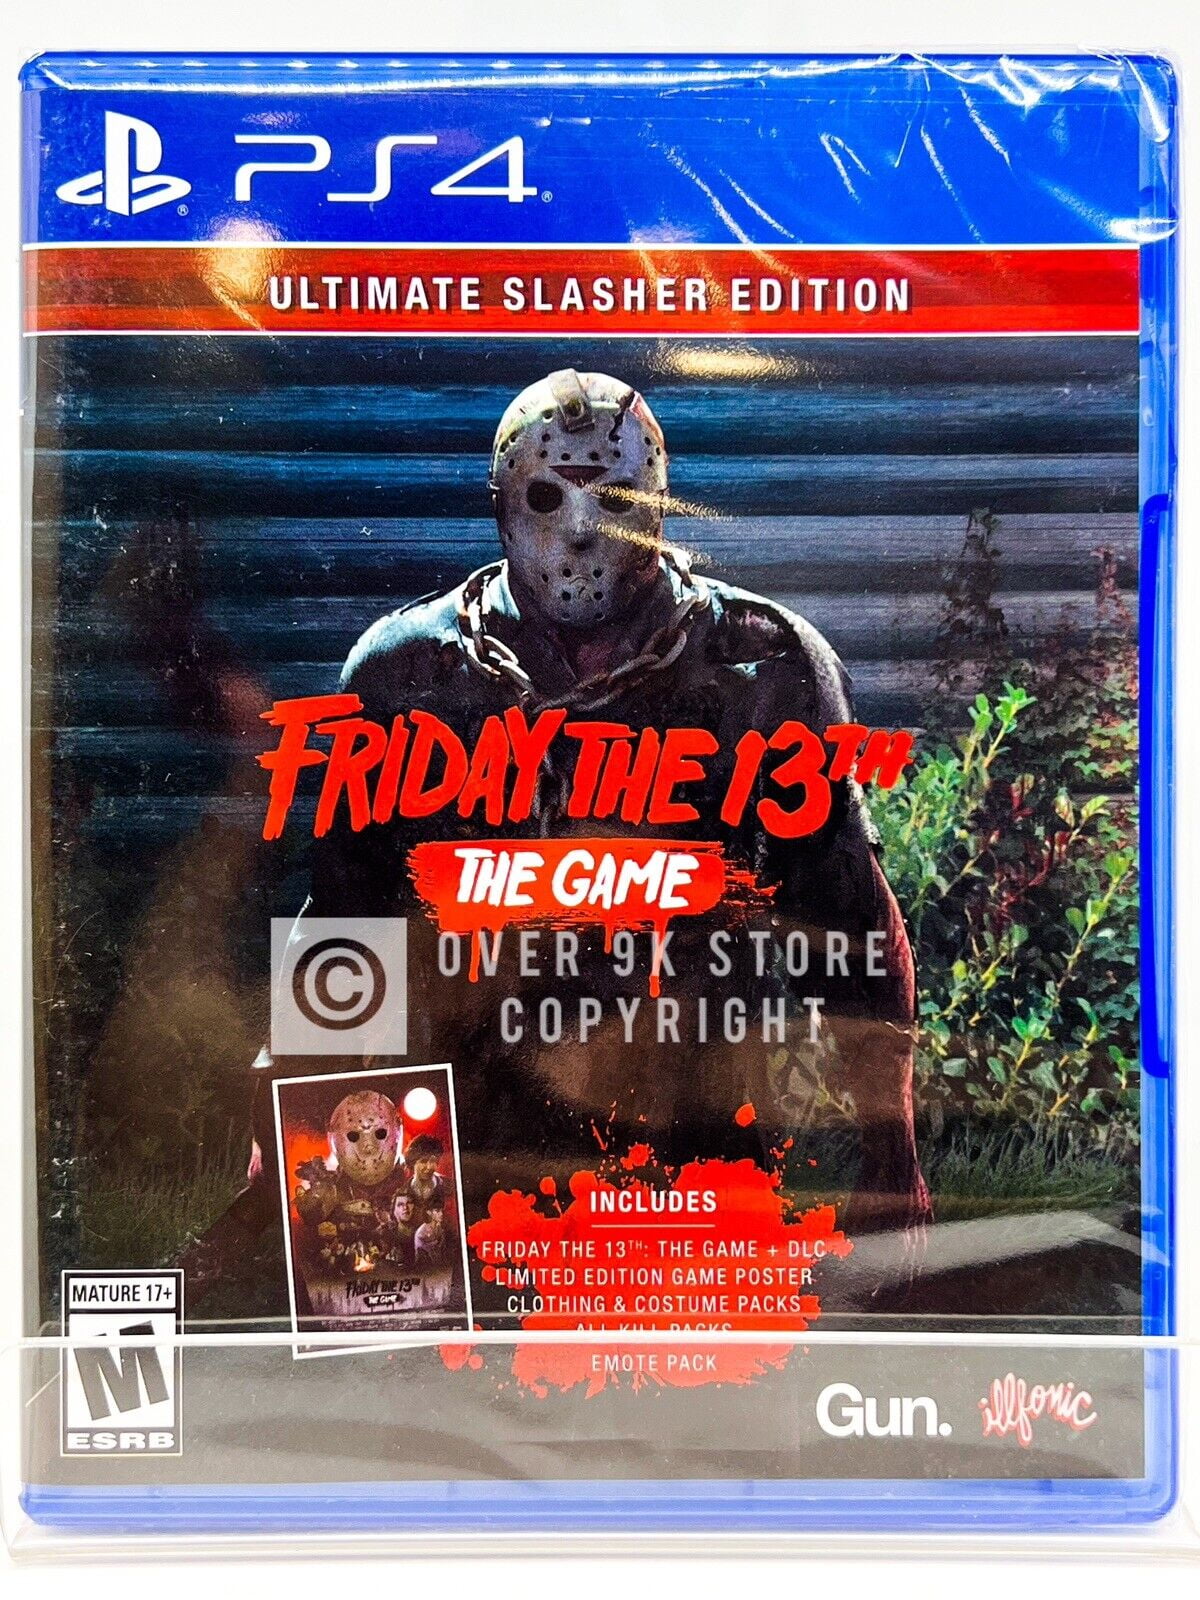 Friday the 13th: The Game Ultimate Slasher Edition - Nintendo